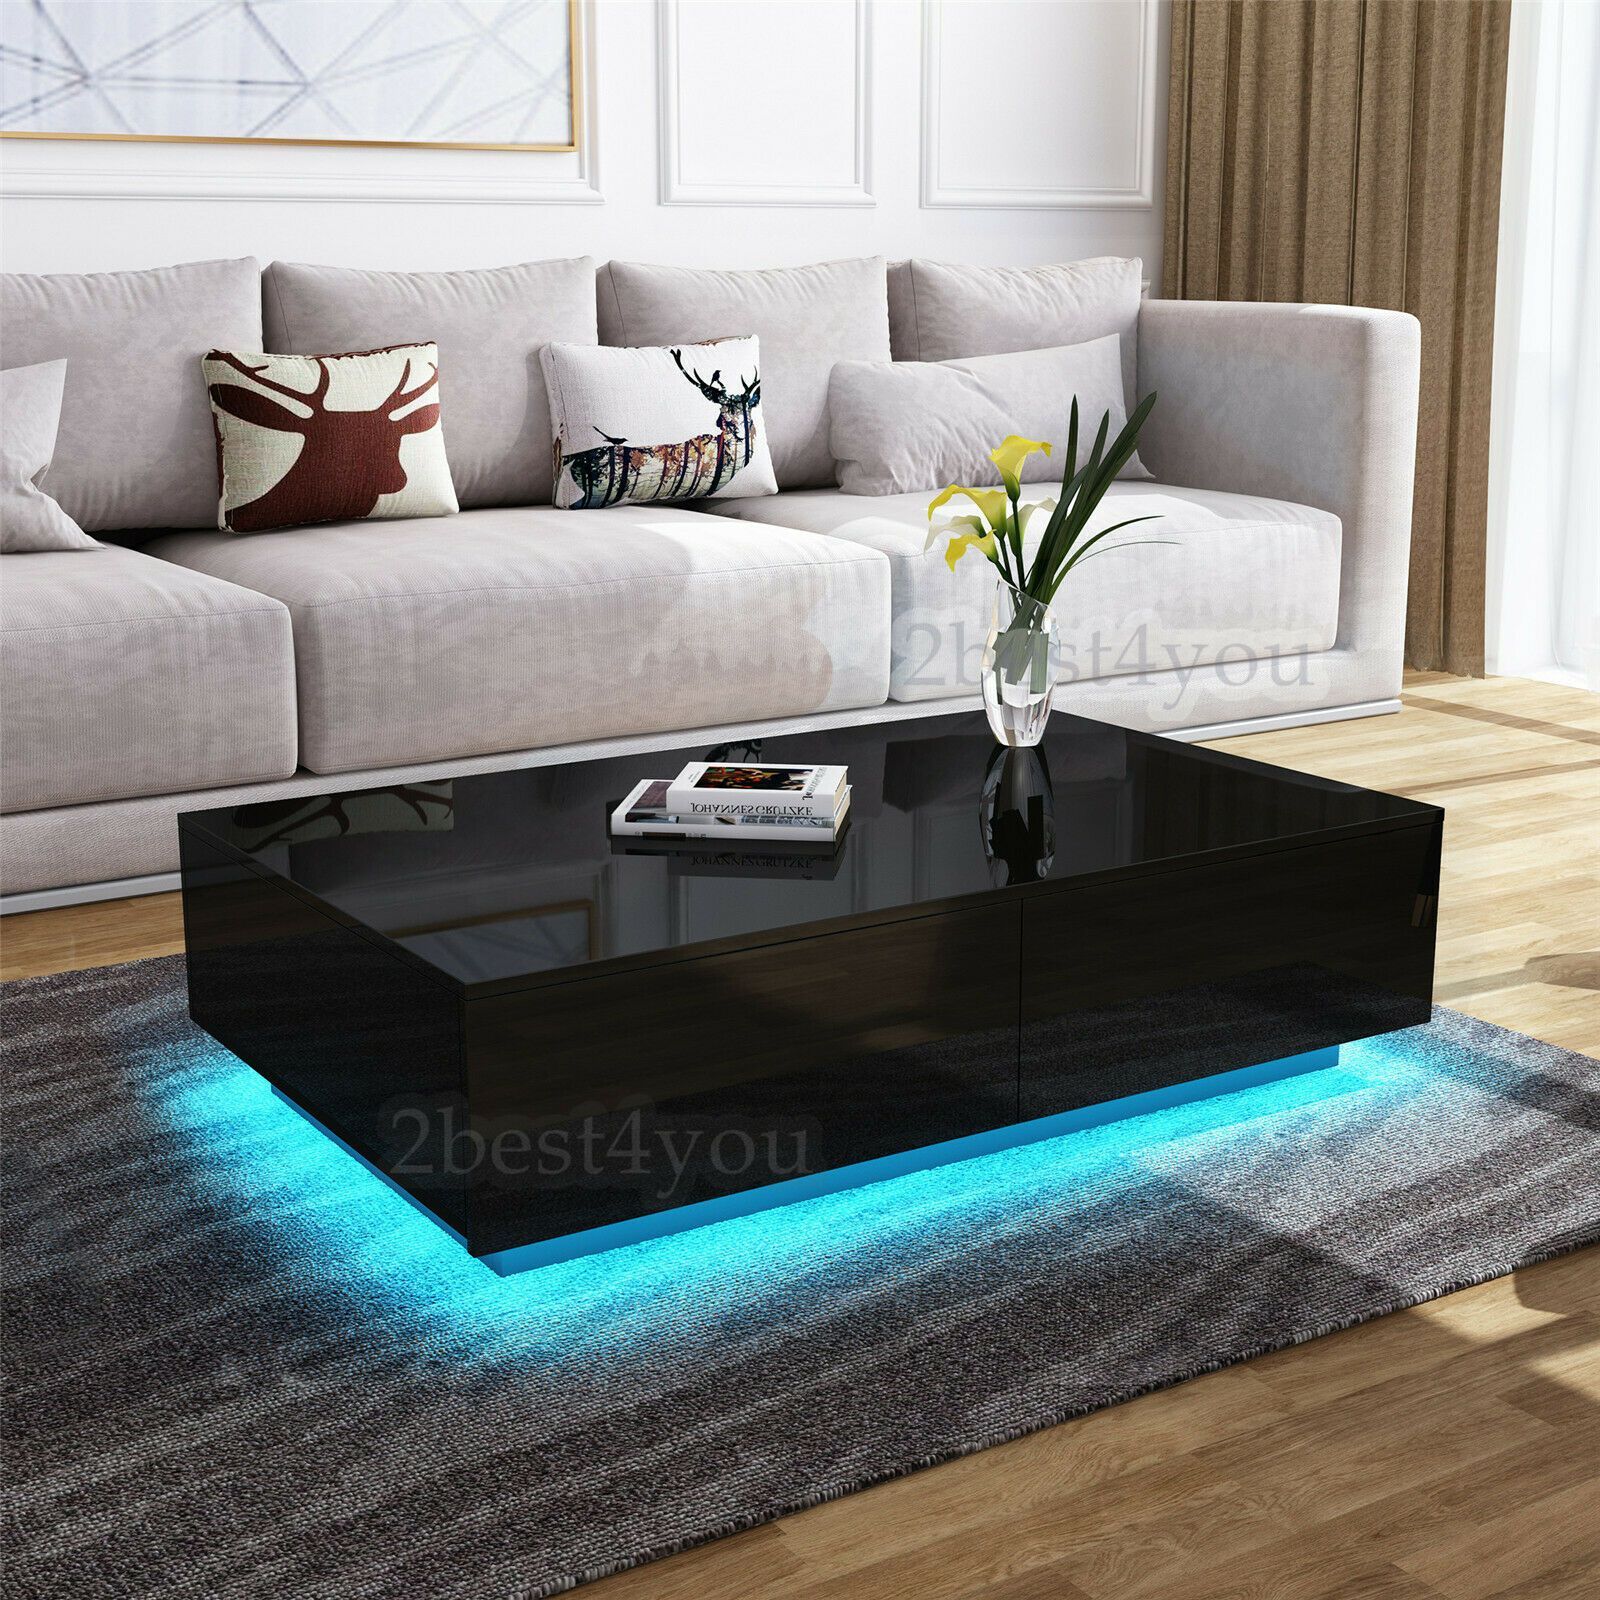 Quinton Glass Coffee Table In Black High Gloss With Led – Isle Furniture Within High Gloss Black Coffee Tables (Gallery 19 of 20)